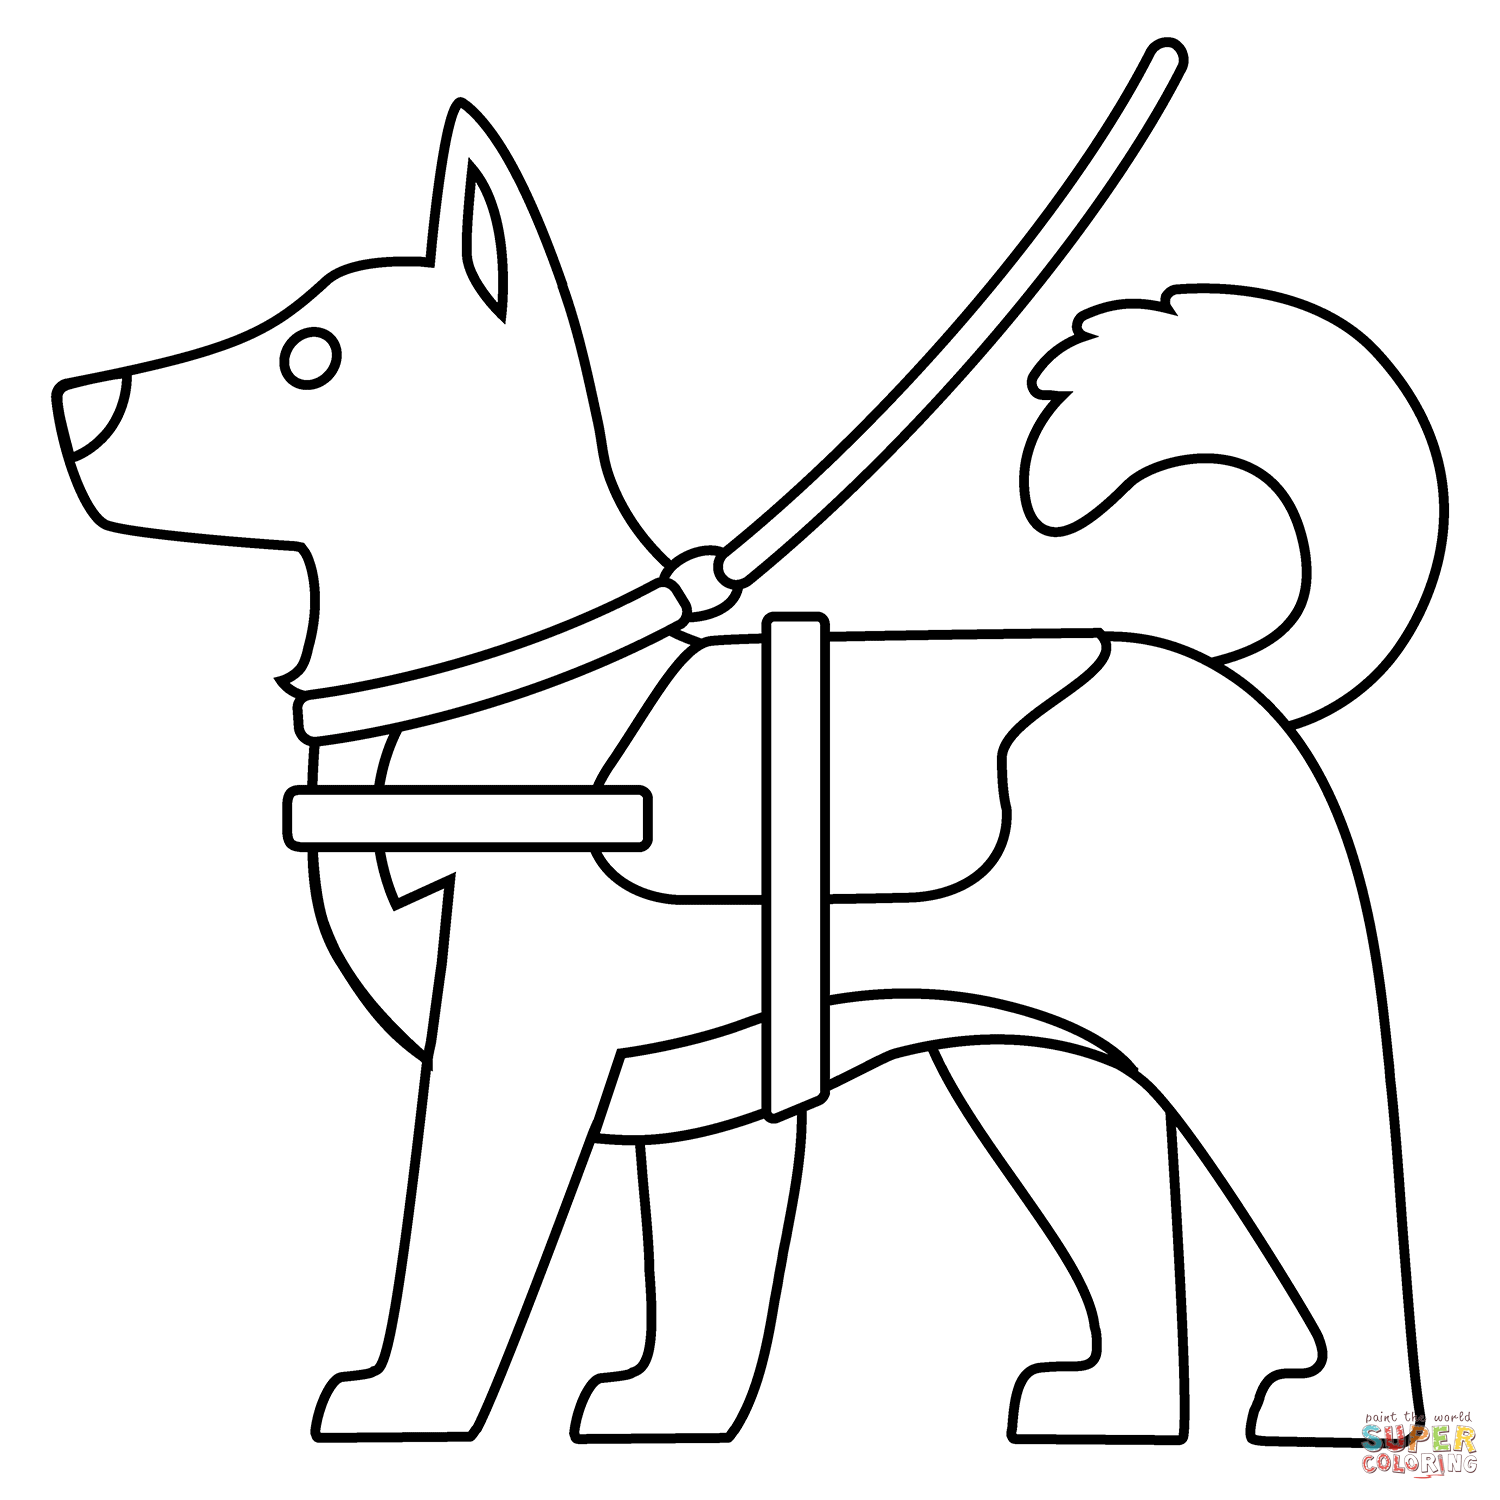 Service dog emoji coloring page free printable coloring pages